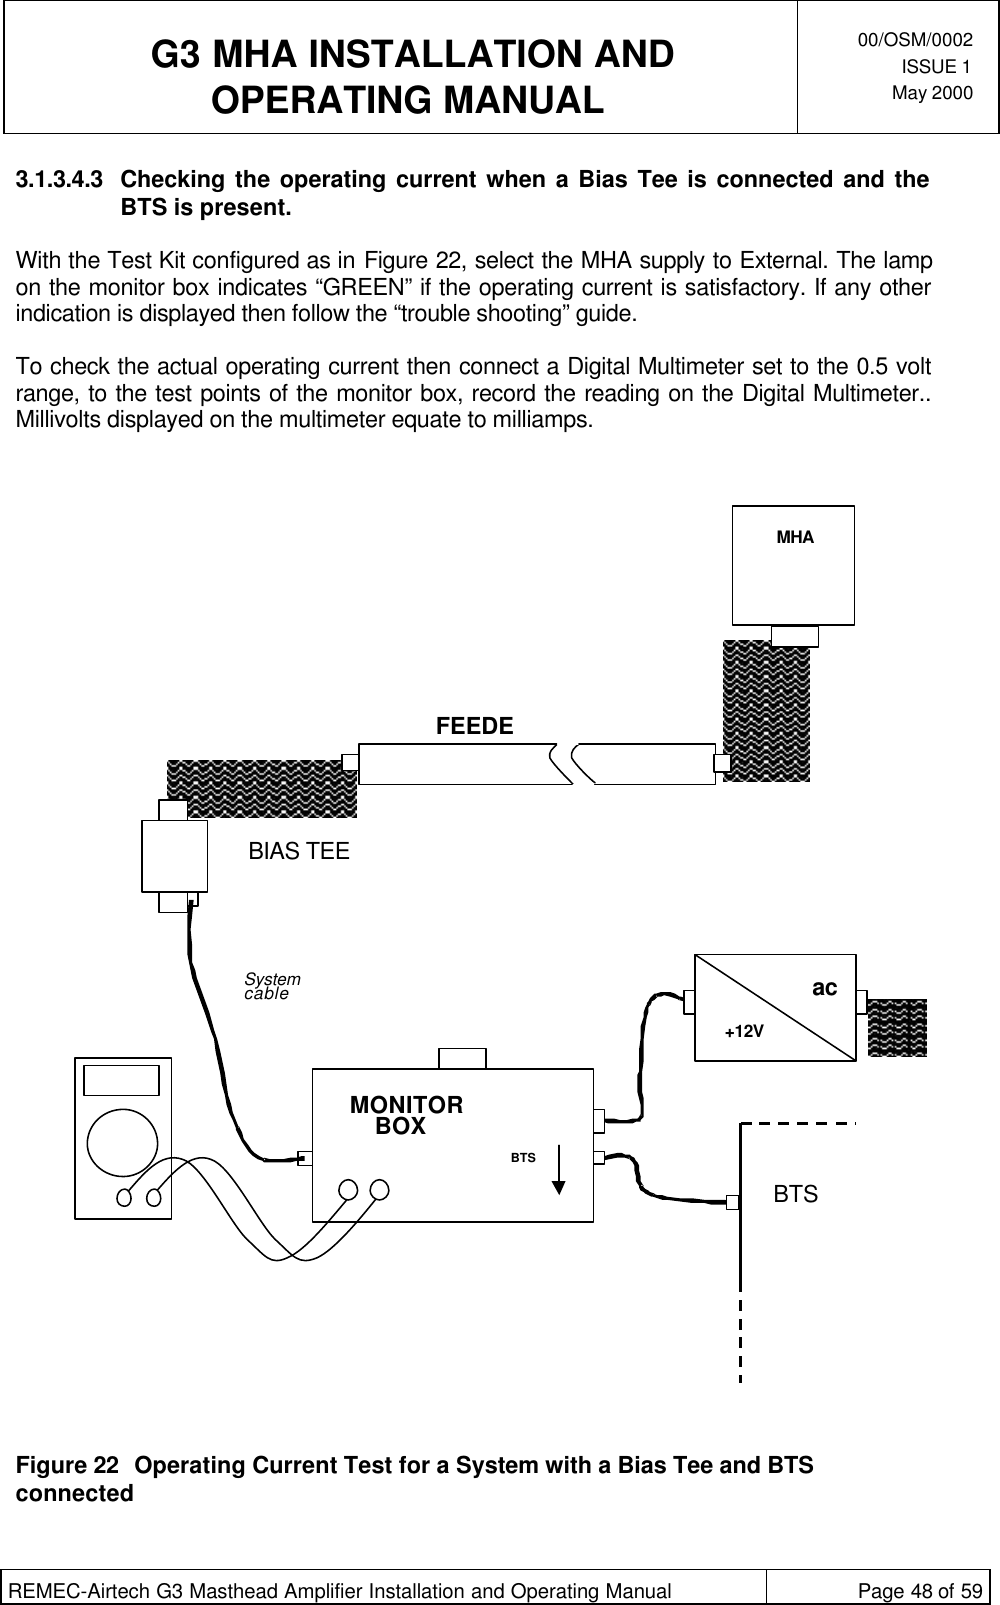  G3 MHA INSTALLATION ANDOPERATING MANUAL00/OSM/0002ISSUE 1May 2000REMEC-Airtech G3 Masthead Amplifier Installation and Operating Manual Page 48 of 593.1.3.4.3 Checking the operating current when a Bias Tee is connected and theBTS is present.With the Test Kit configured as in Figure 22, select the MHA supply to External. The lampon the monitor box indicates “GREEN” if the operating current is satisfactory. If any otherindication is displayed then follow the “trouble shooting” guide.To check the actual operating current then connect a Digital Multimeter set to the 0.5 voltrange, to the test points of the monitor box, record the reading on the Digital Multimeter..Millivolts displayed on the multimeter equate to milliamps.Figure 22 Operating Current Test for a System with a Bias Tee and BTSconnectedFEEDERBIAS TEEac+12VMONITORBOXBTSMHABTSSystemcable